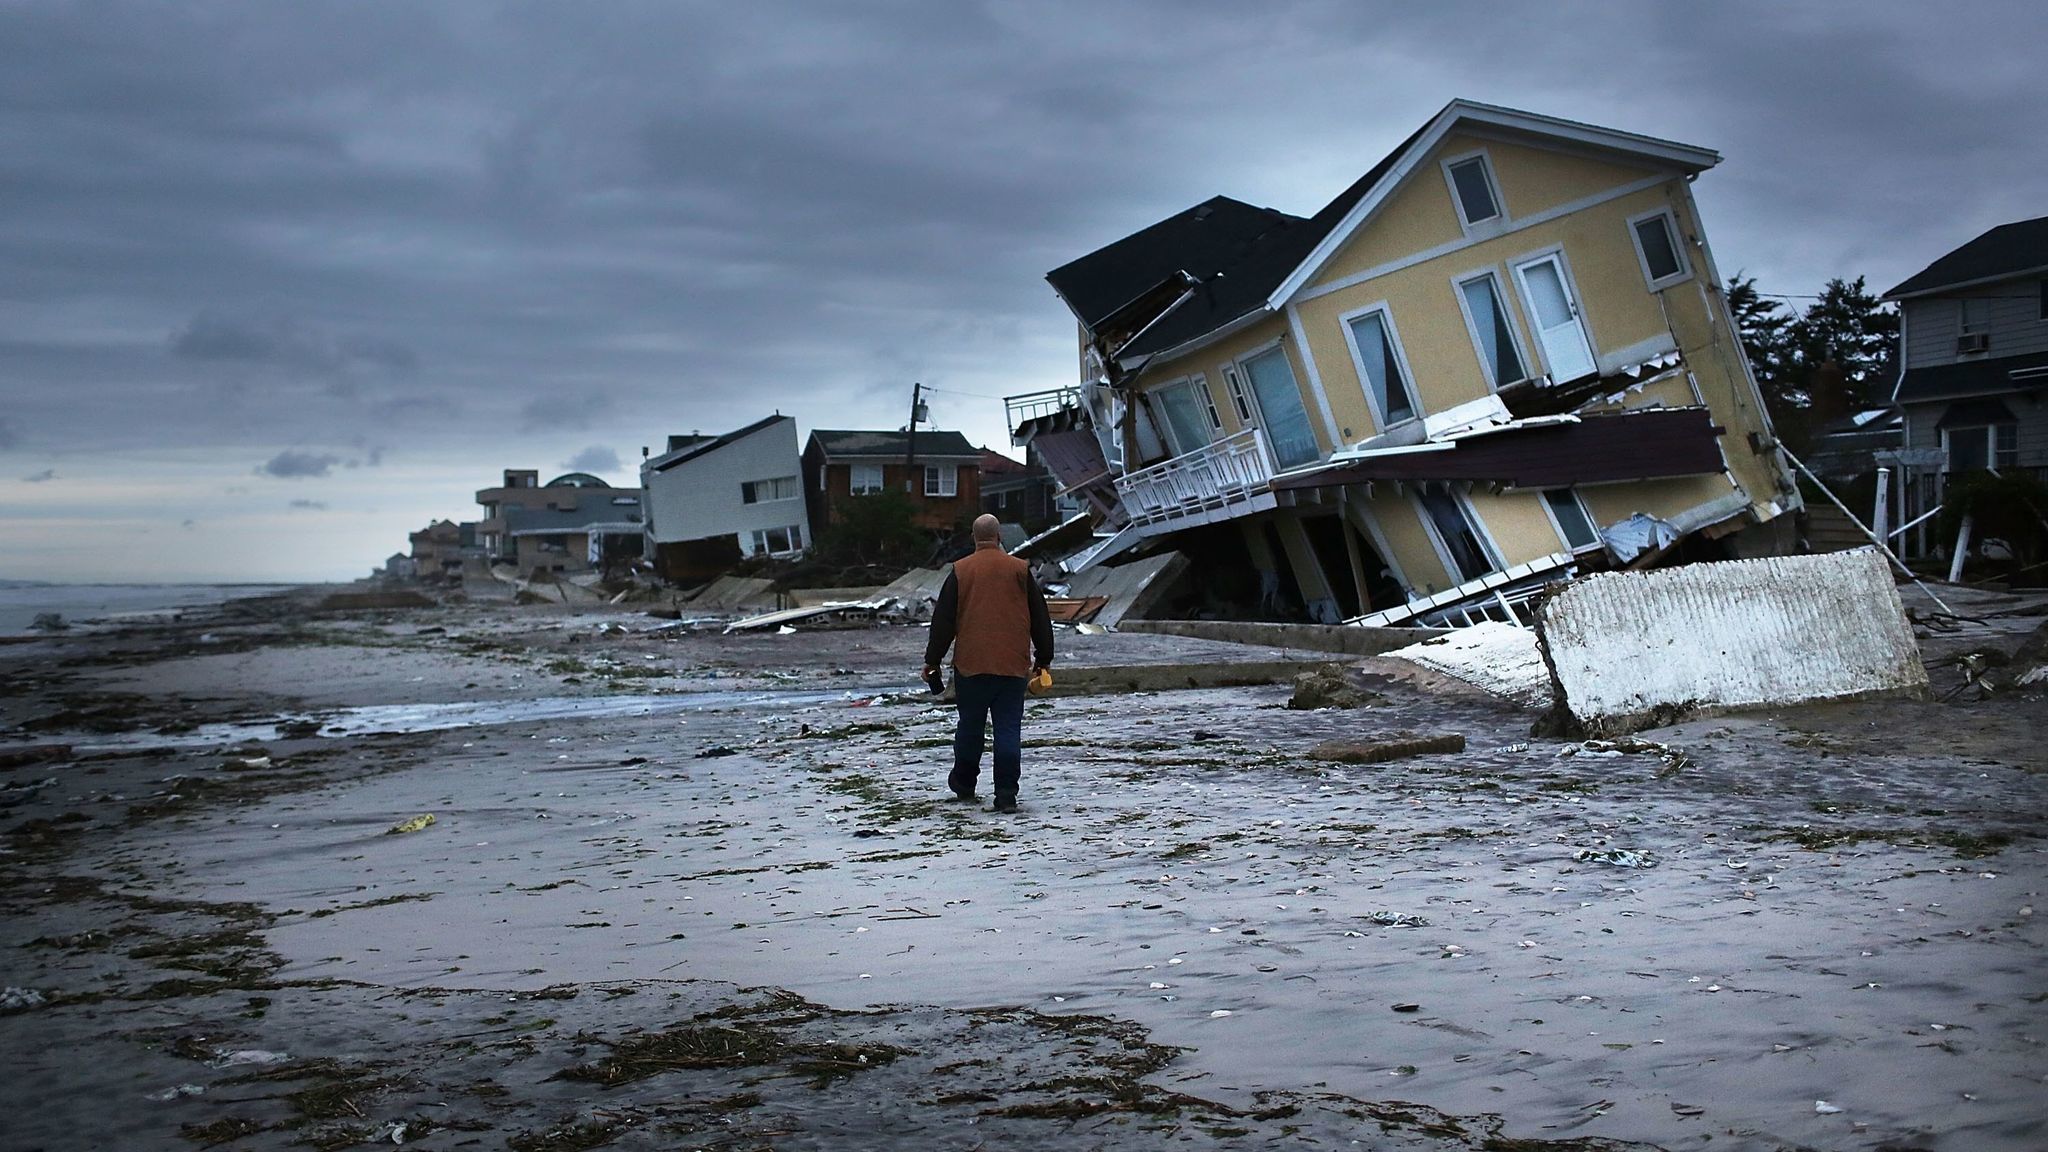 Damage is viewed in the Rockaway neighborhood of the Queens borough of New York City, where the historic boardwalk was washed away during Hurricane Sandy.